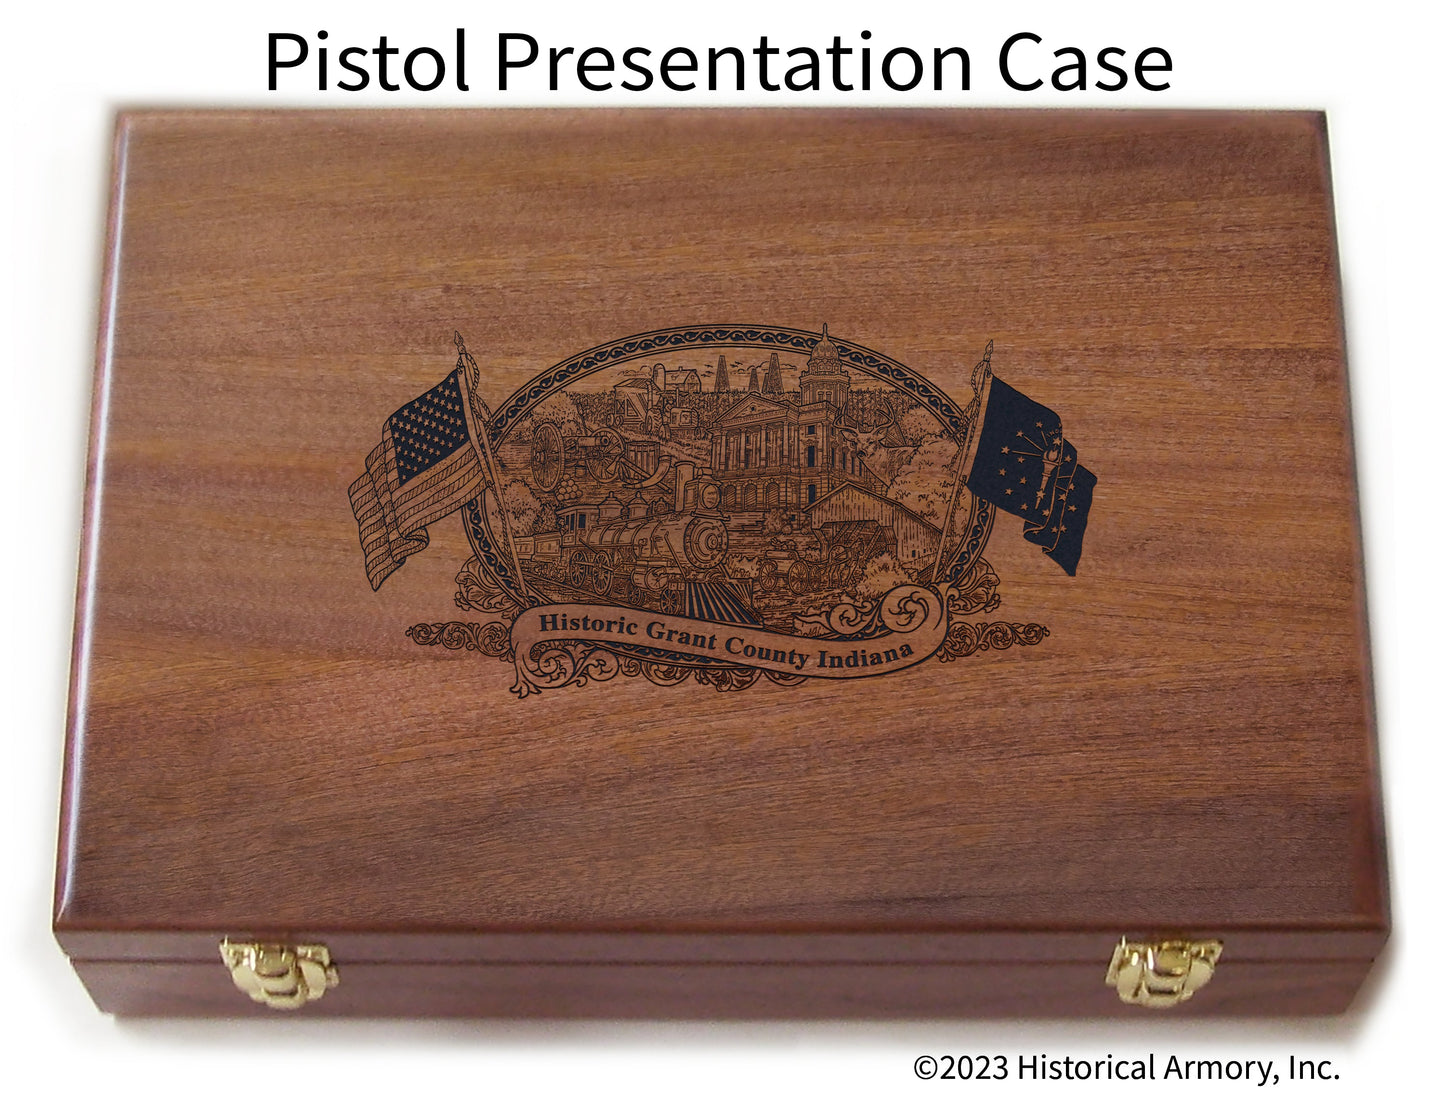 Grant County Indiana Engraved .45 Auto Ruger 1911 Presentation Case